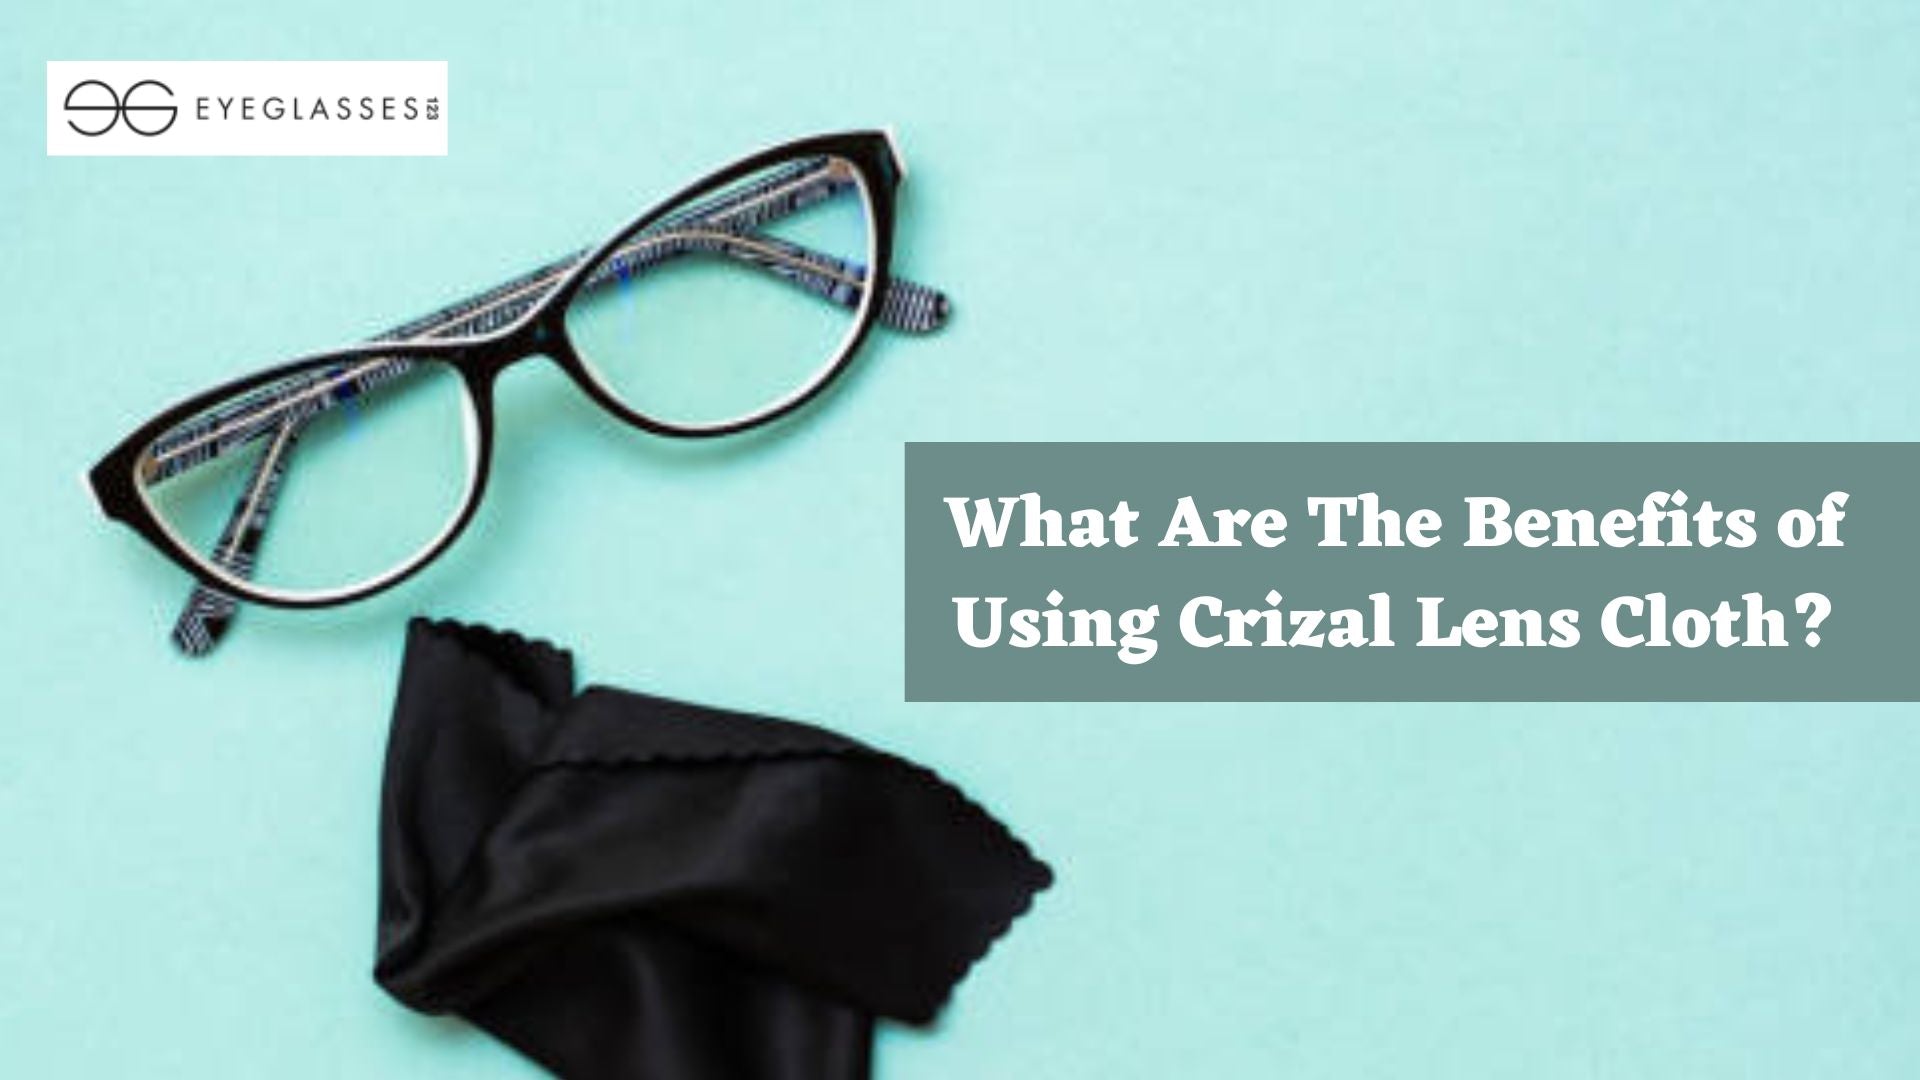 What Are The Benefits of Using Crizal Lens Cloth?